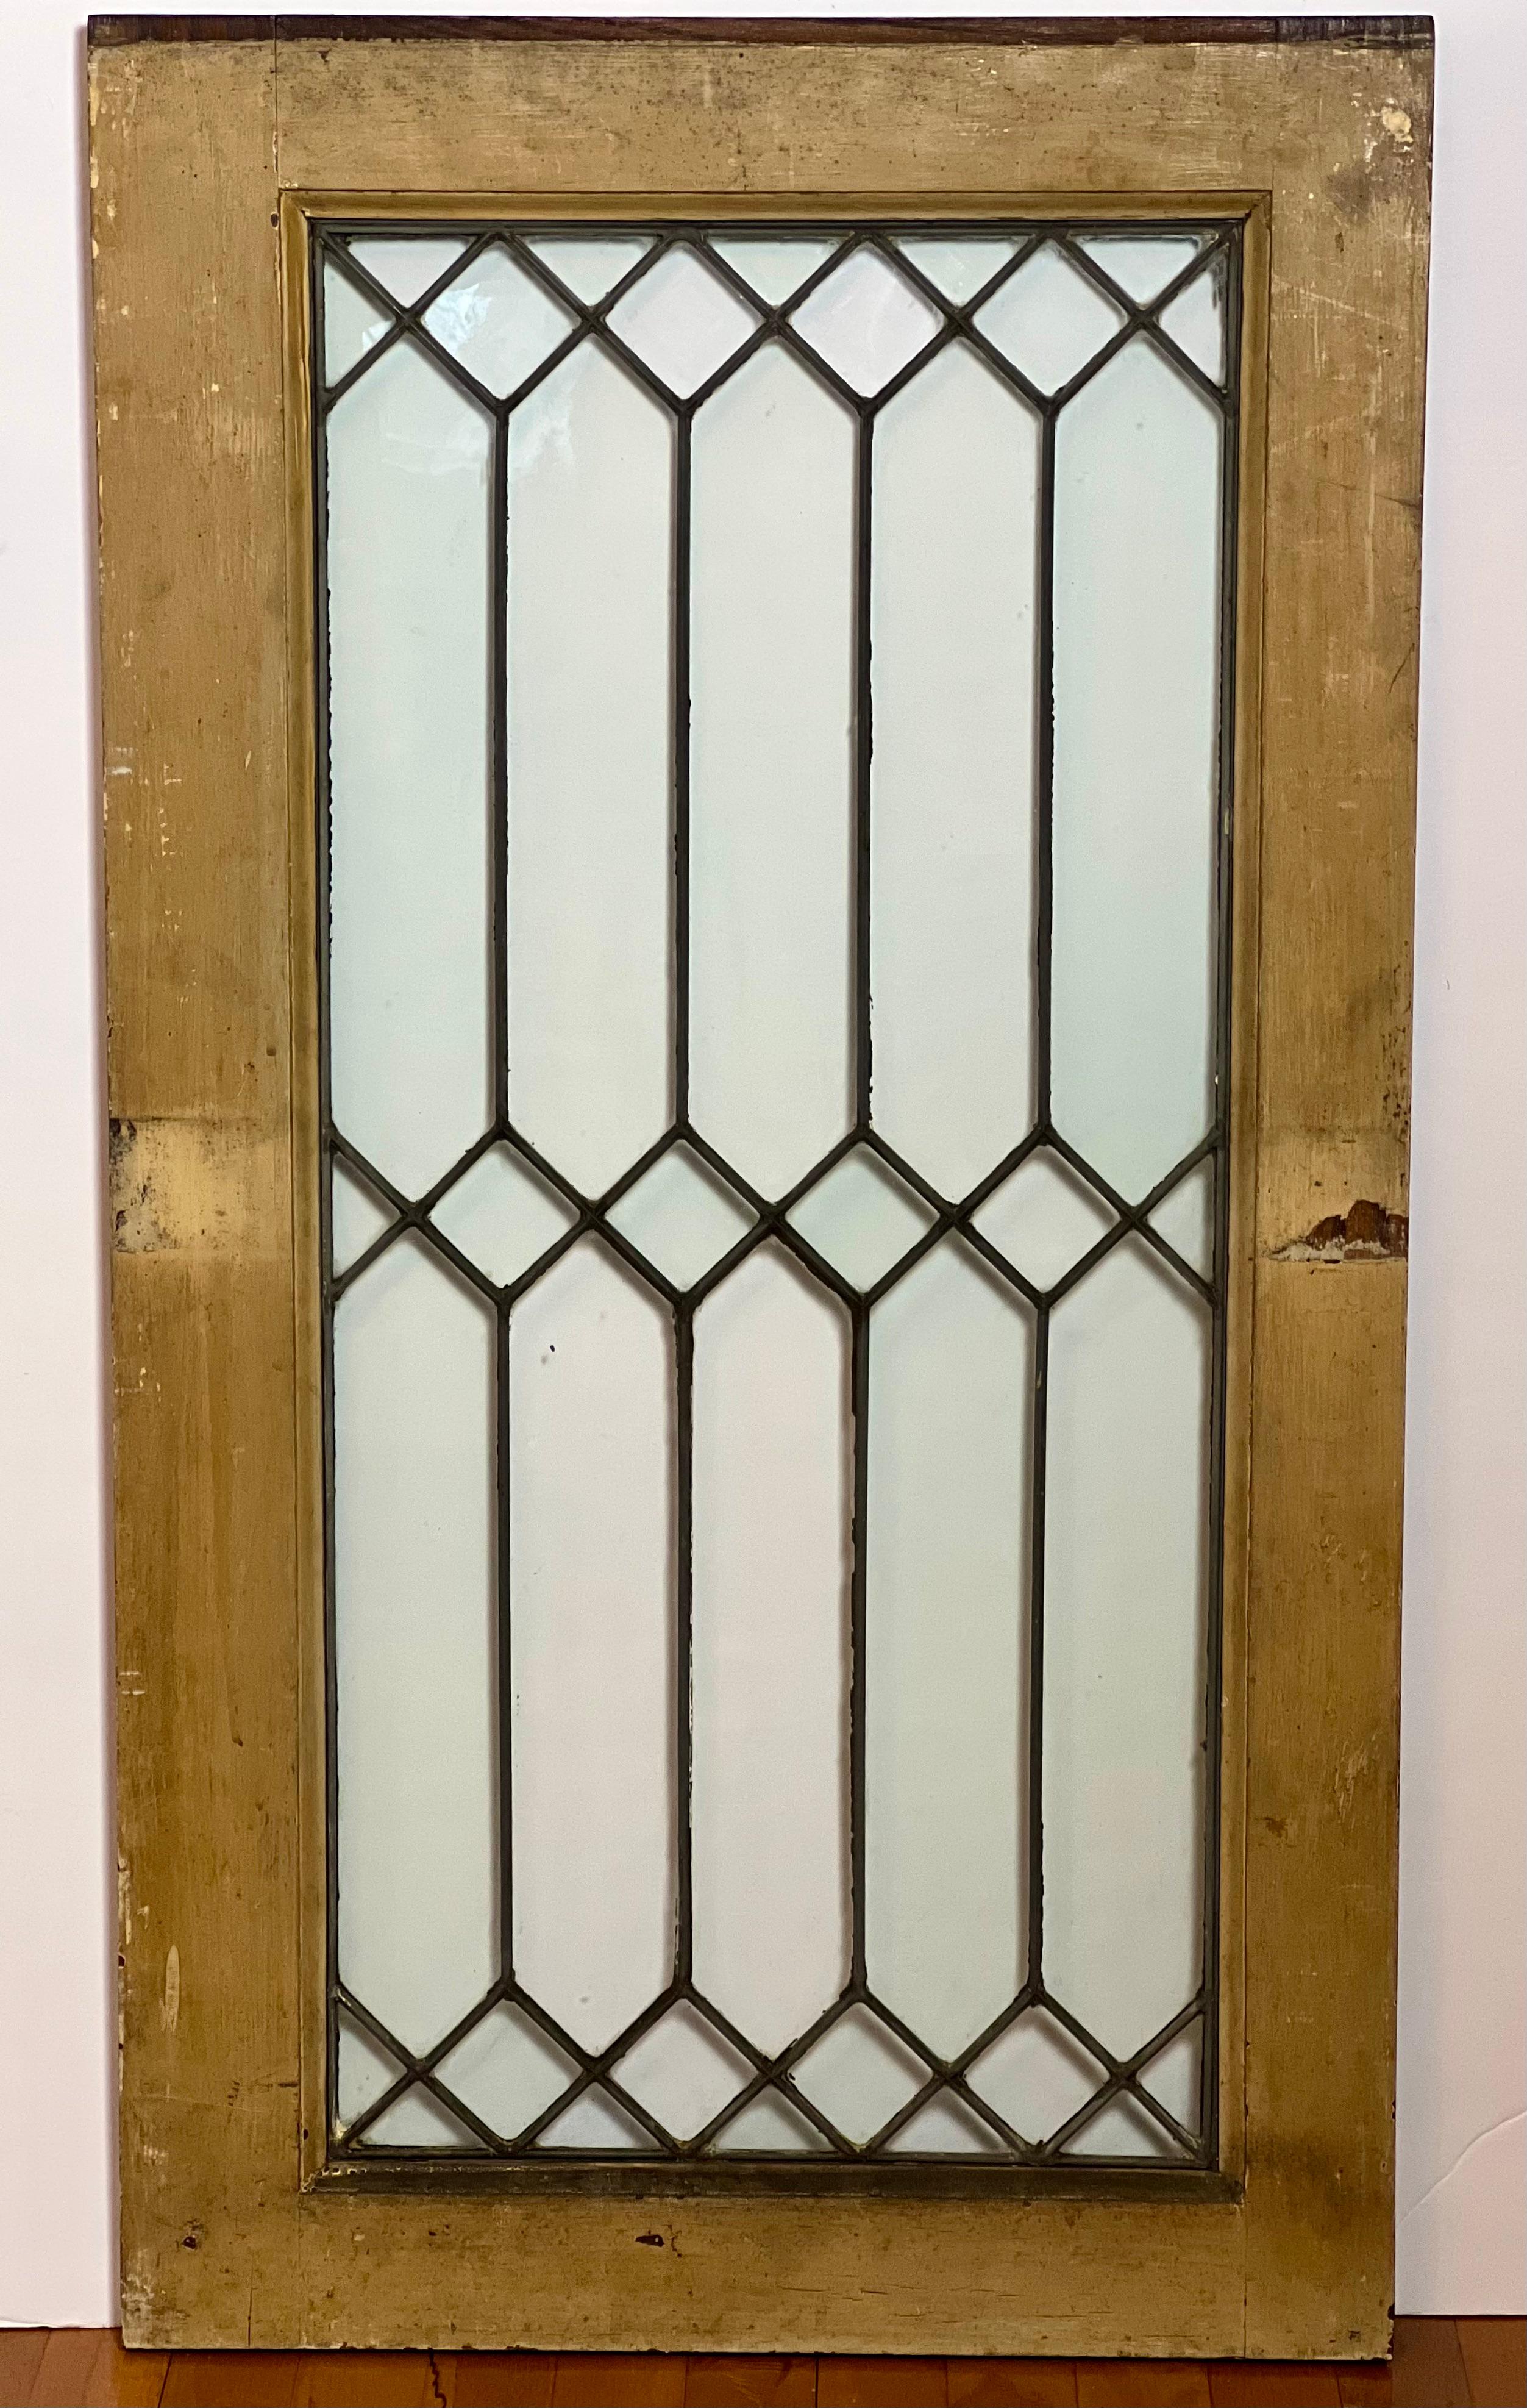 Antique clear leaded glass window in wood frame, c. 1900s.

Wonderful window encased in original wood frame with a clean and crisp, timeless geometrical pattern with straight lines and diamonds. It fully transmits light with clear glass in good